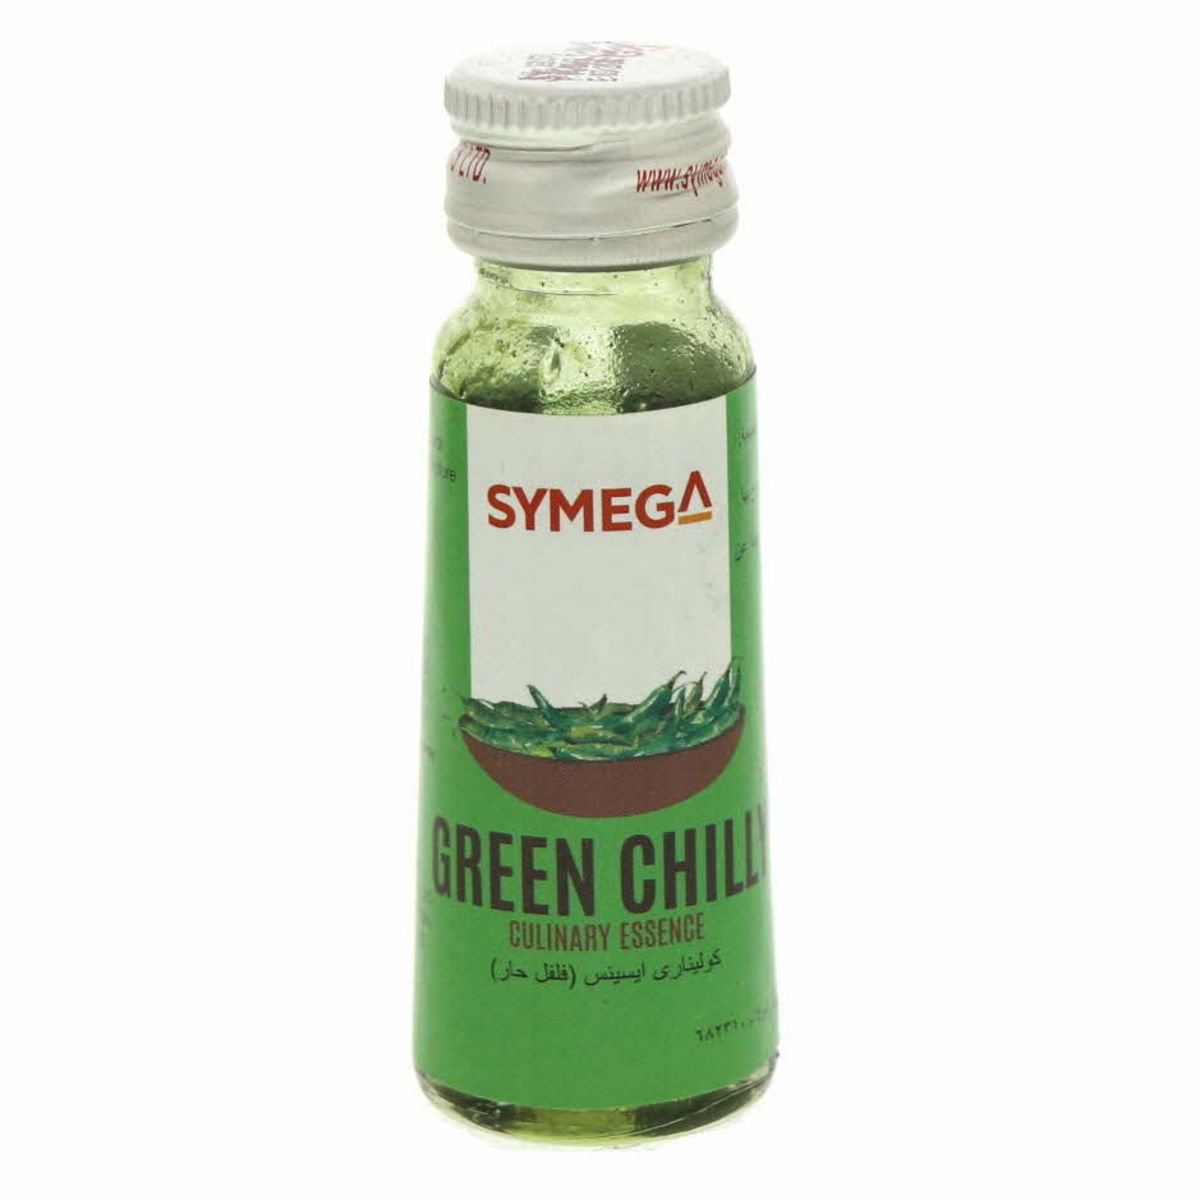 Symega Green Chilly Culinary Essence 20 ml